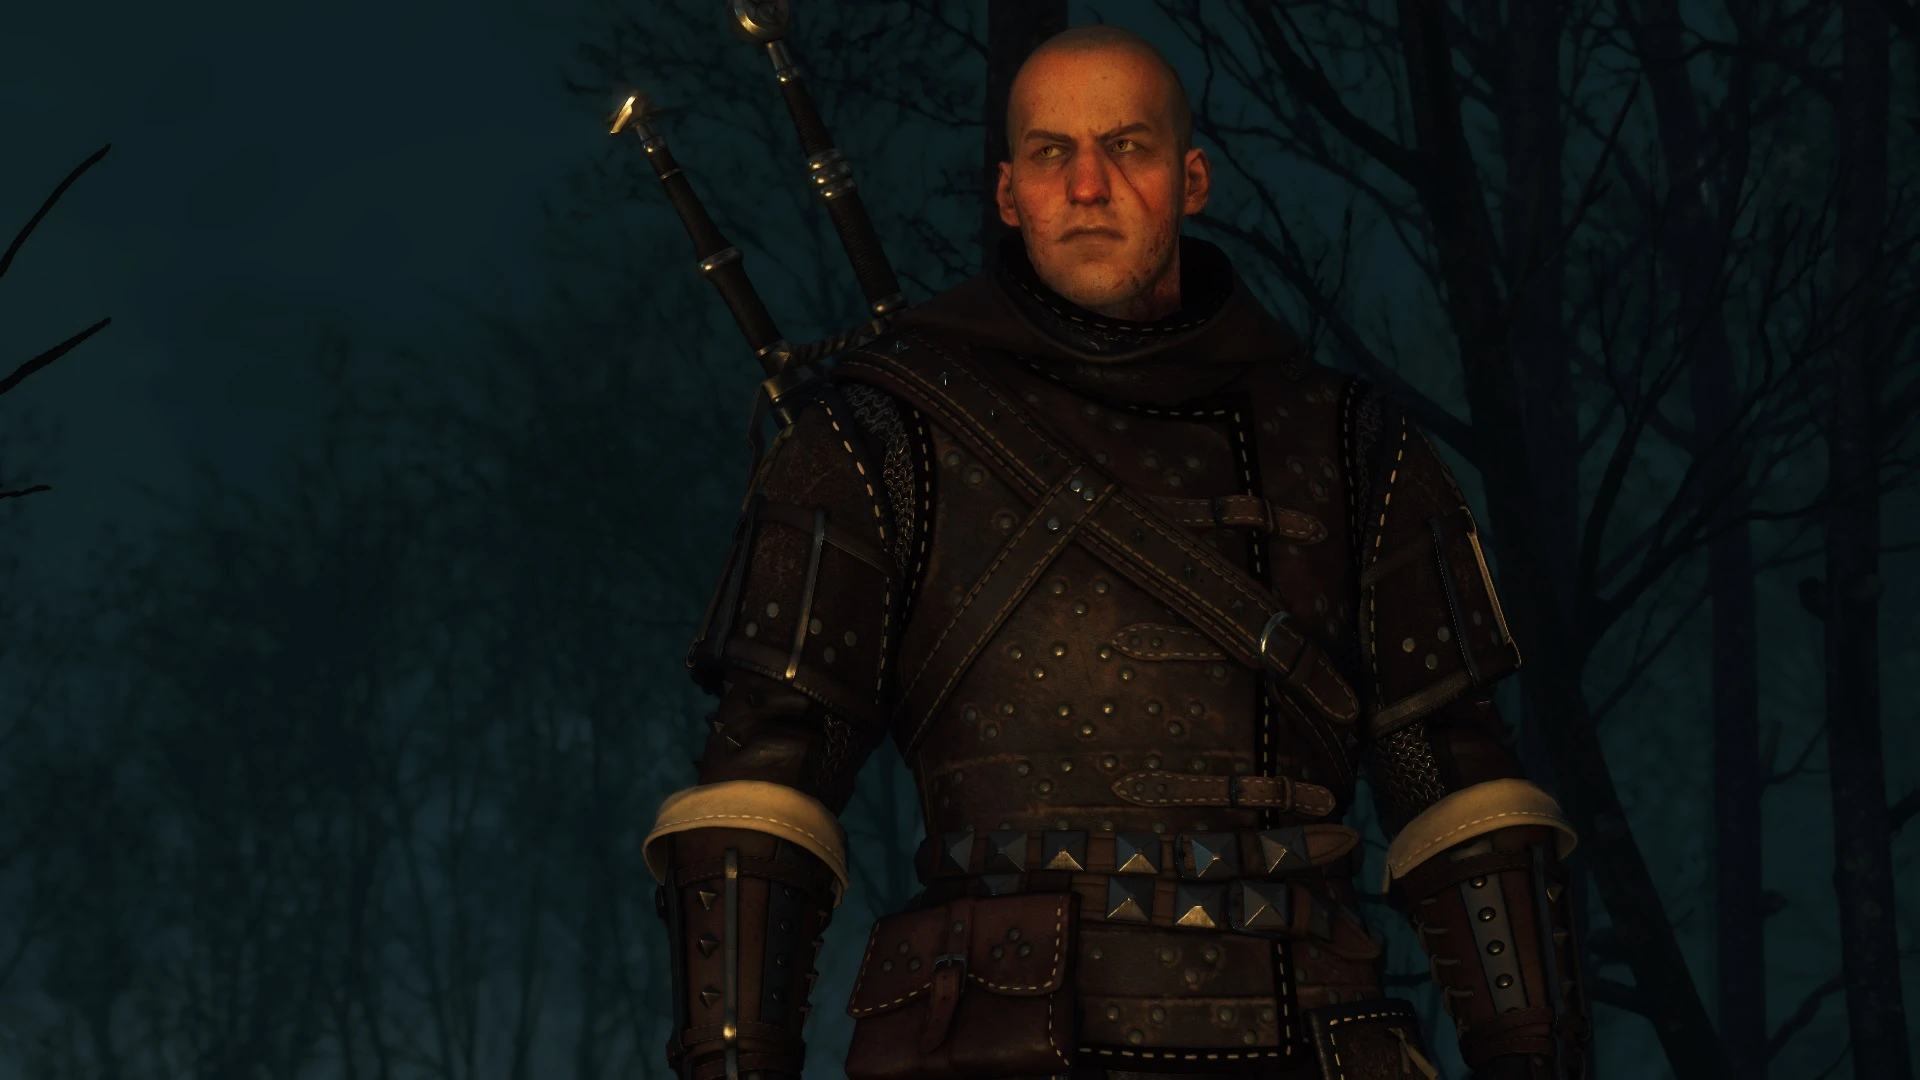 The witcher 3 witcher school gear фото 101